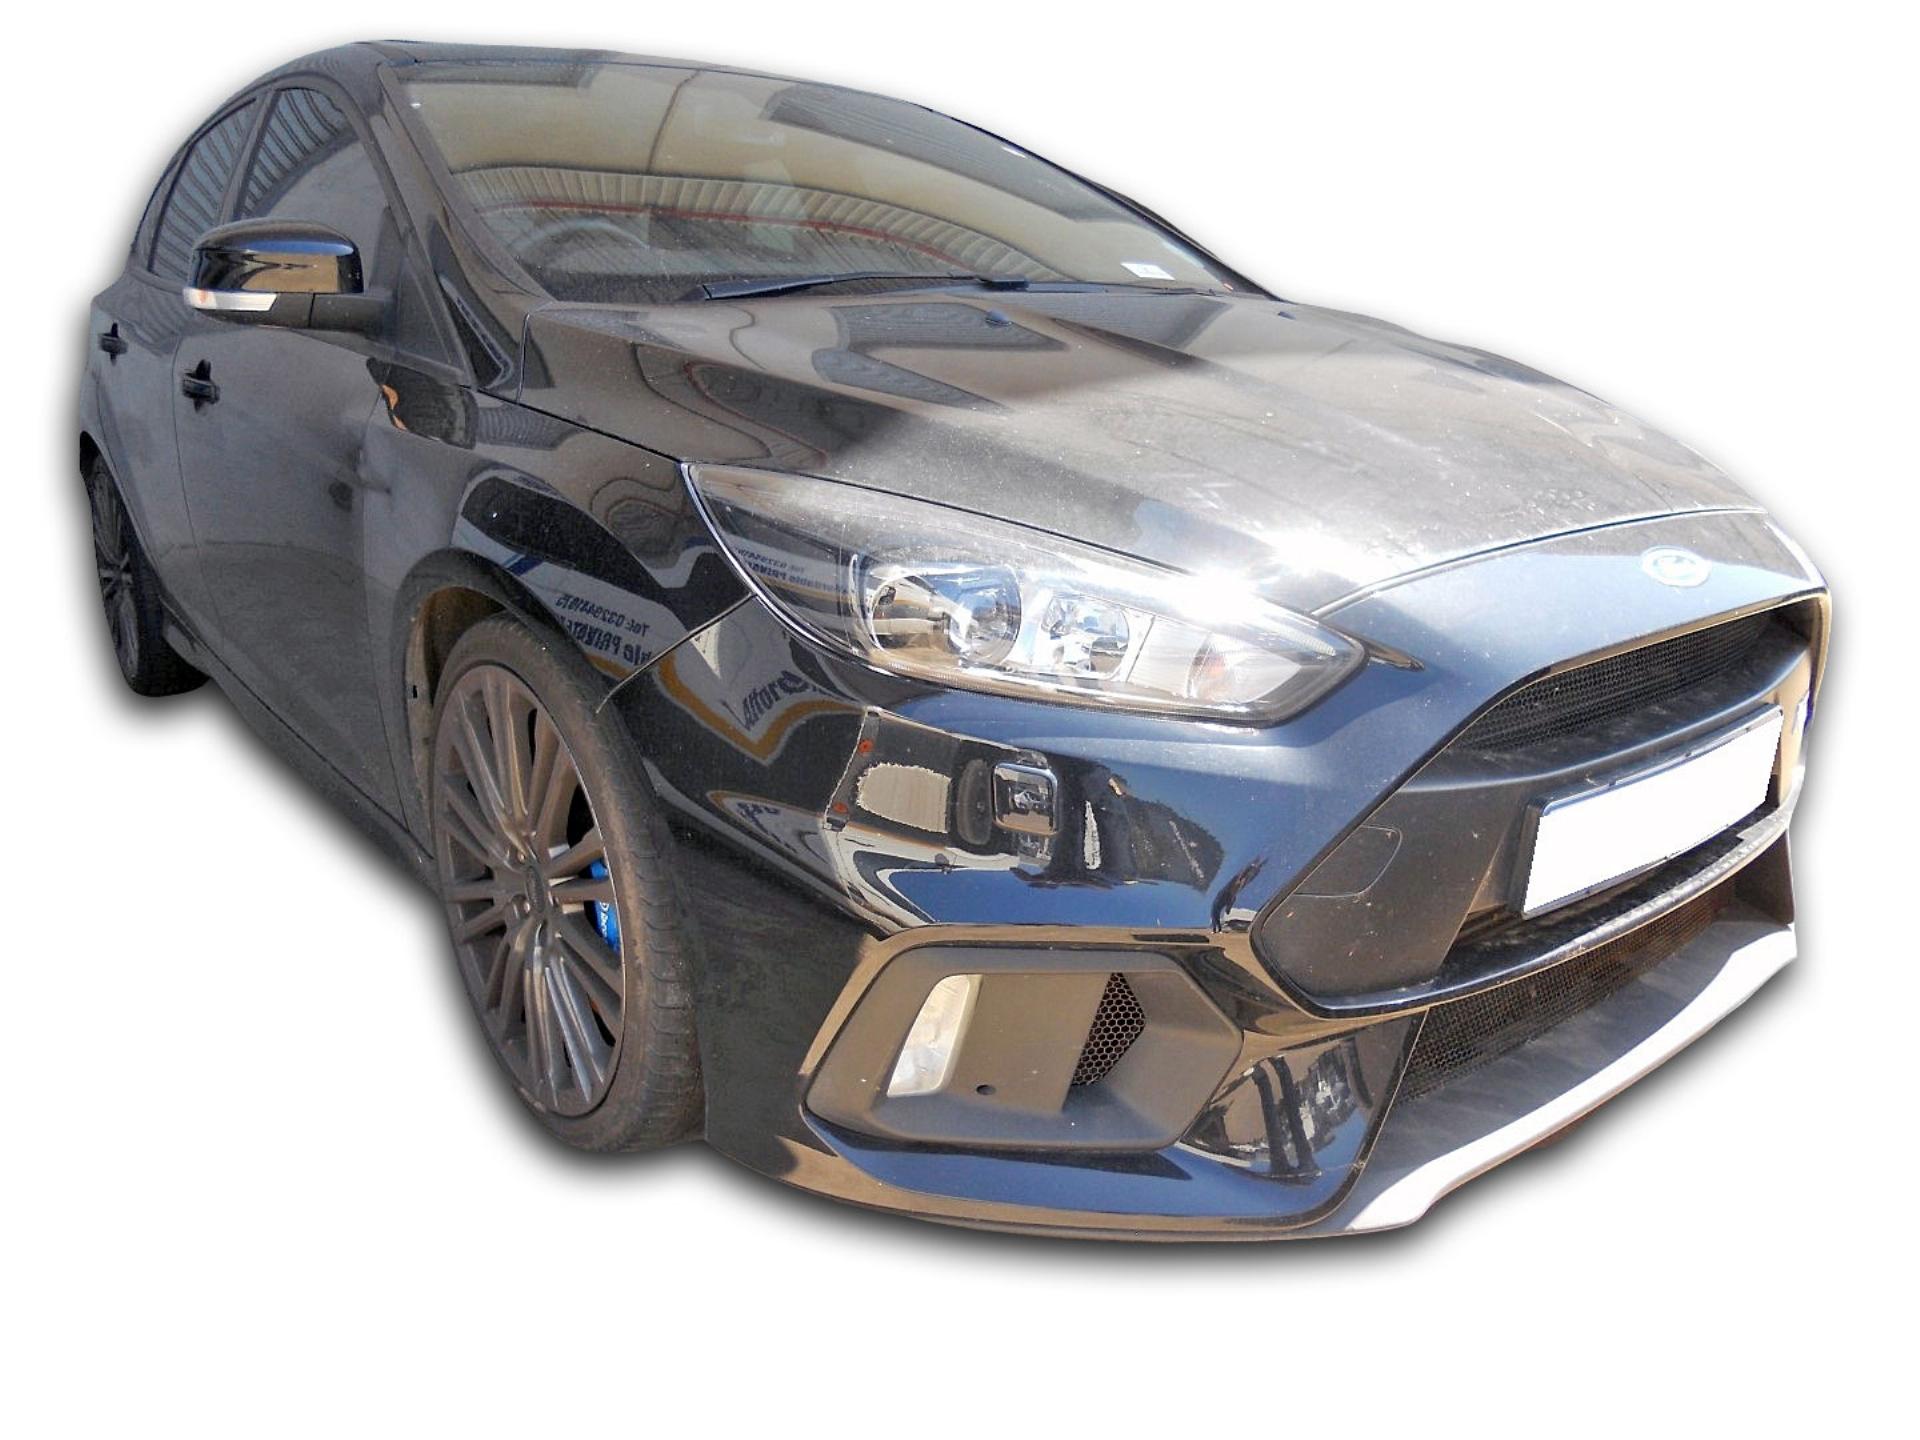 Ford Focus RS 2.3 Ecoboost